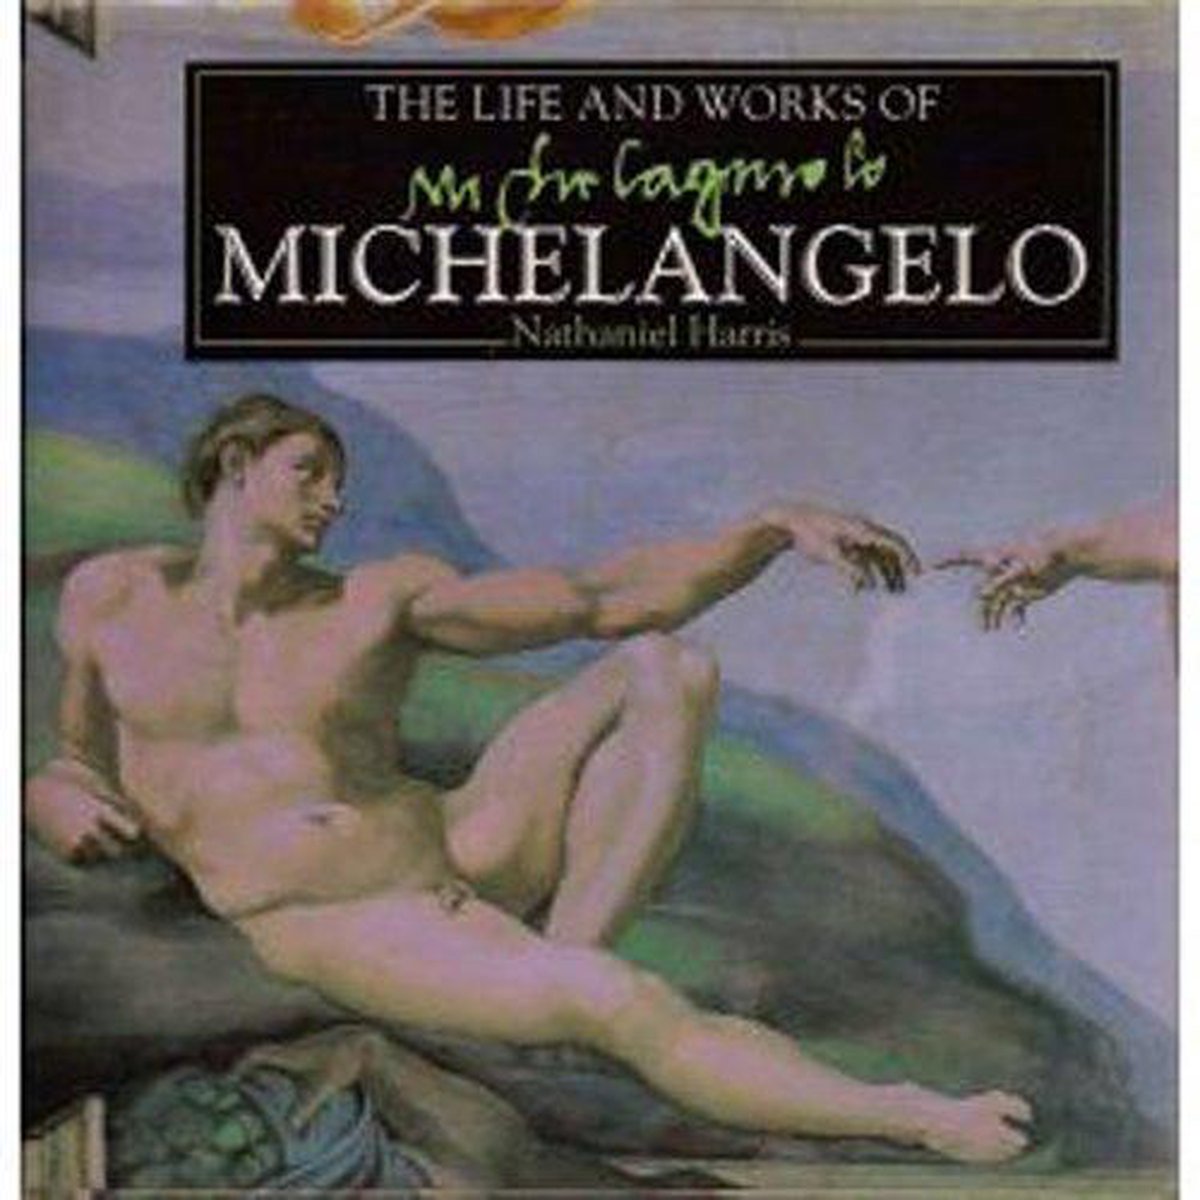 The life and works of Michel Angelo